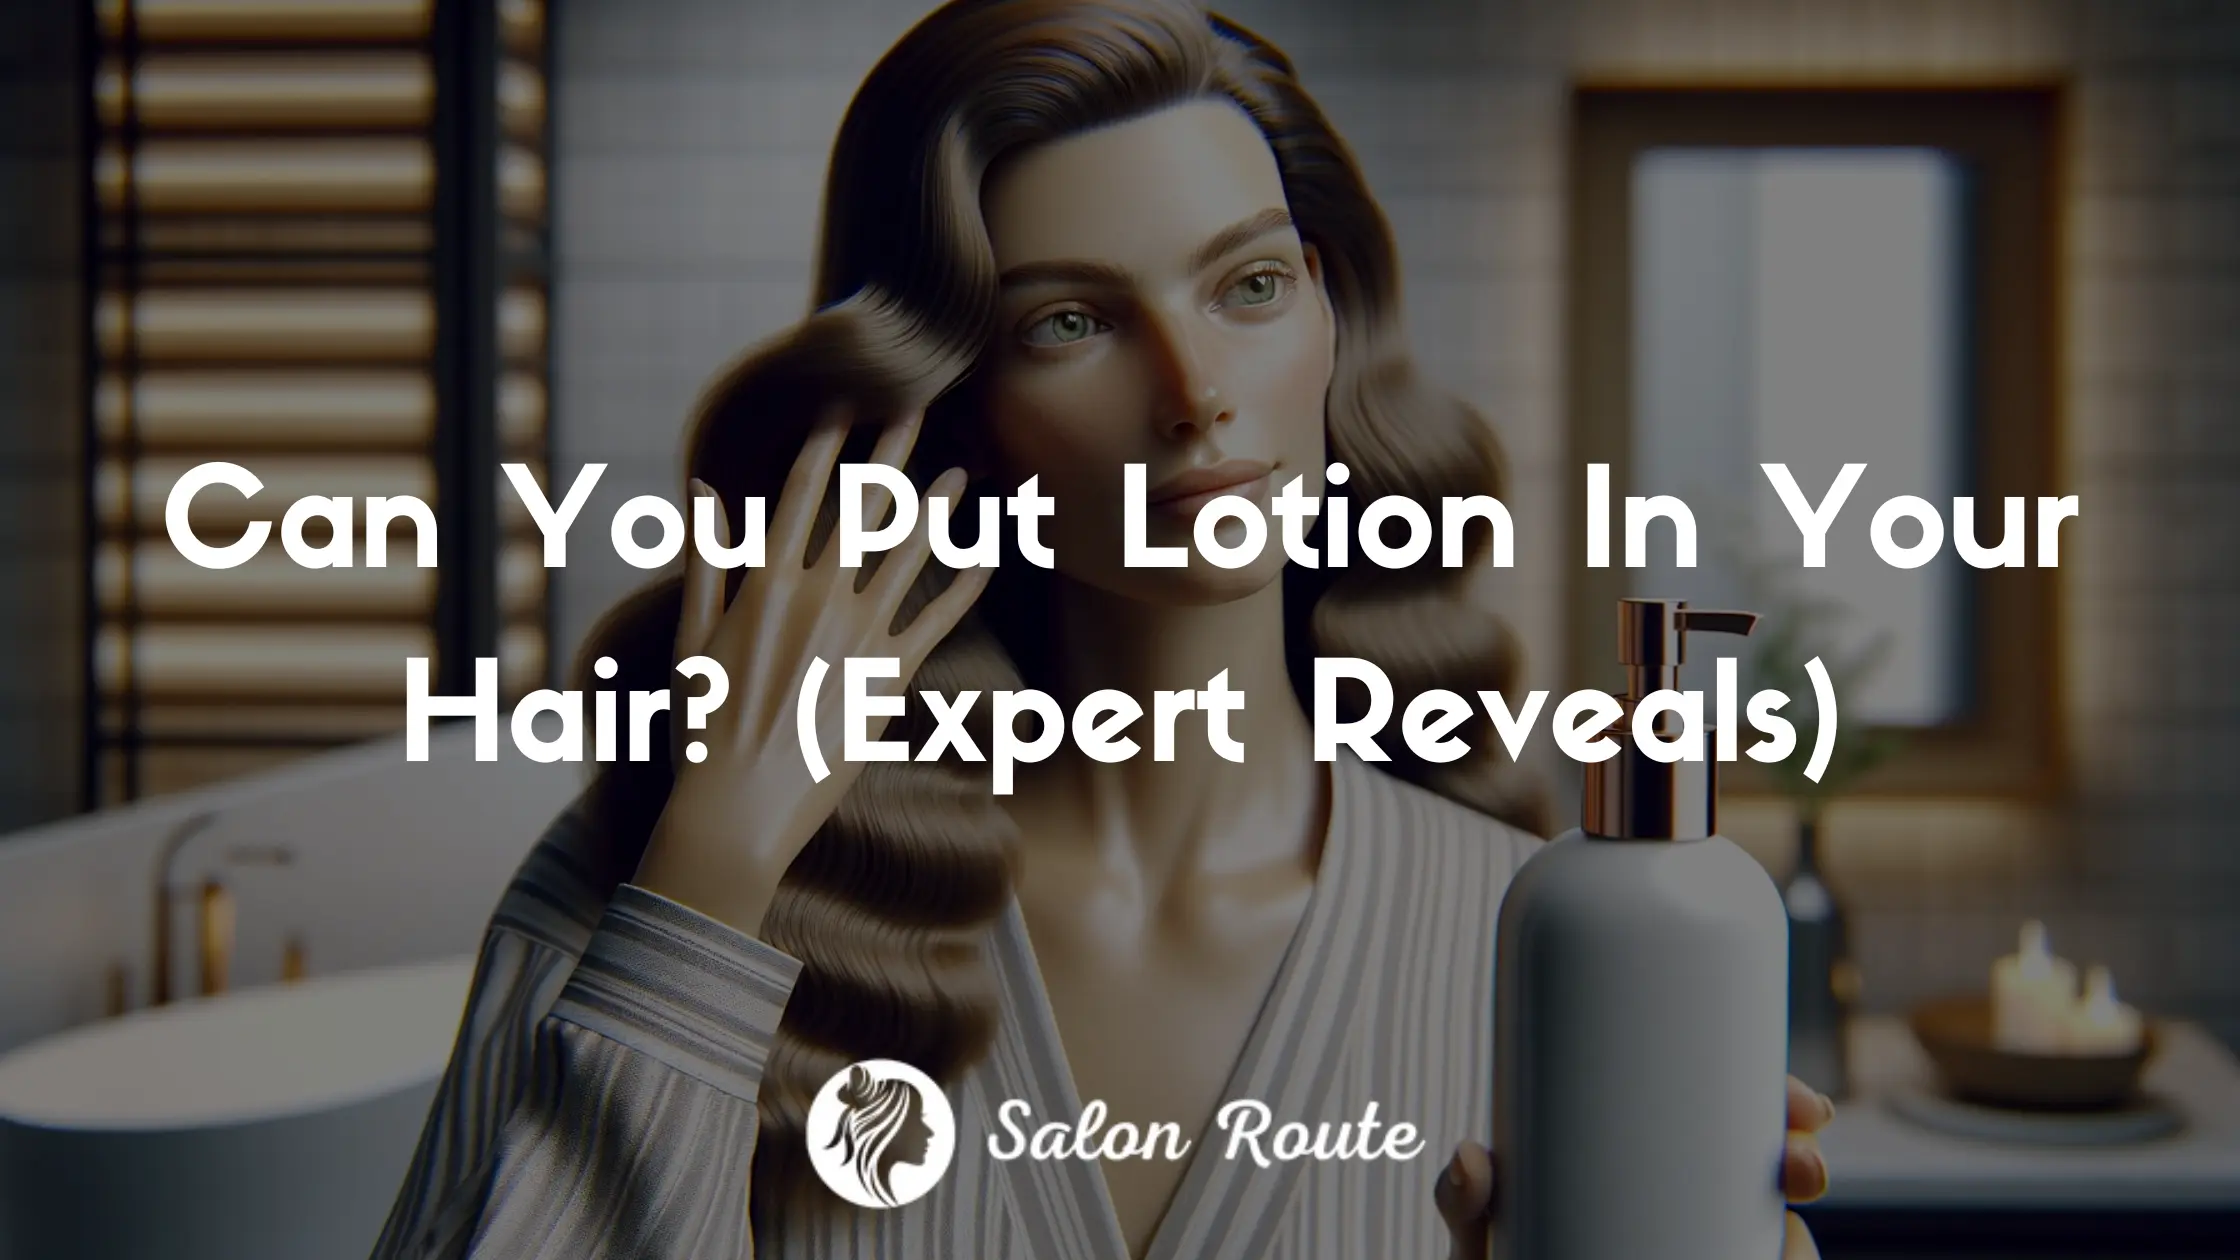 Can You Put Lotion In Your Hair? (Expert Reveals)